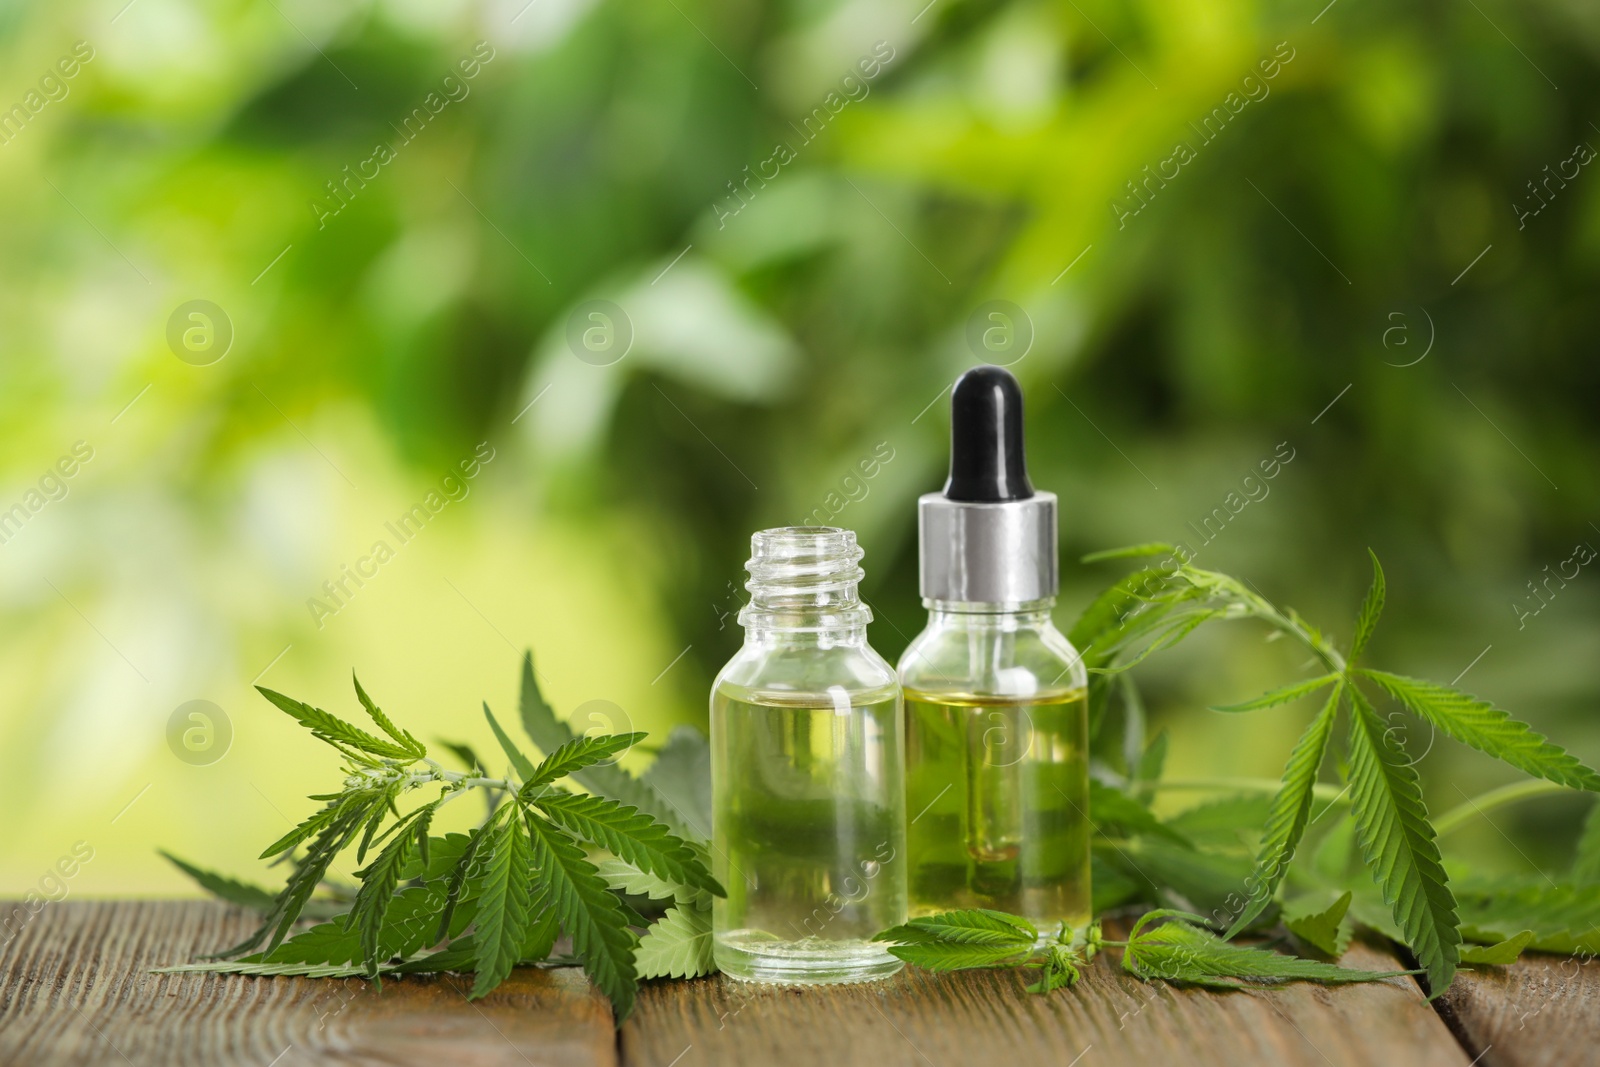 Photo of Hemp leaves, bottles of CBD oil and THC tincture on wooden table